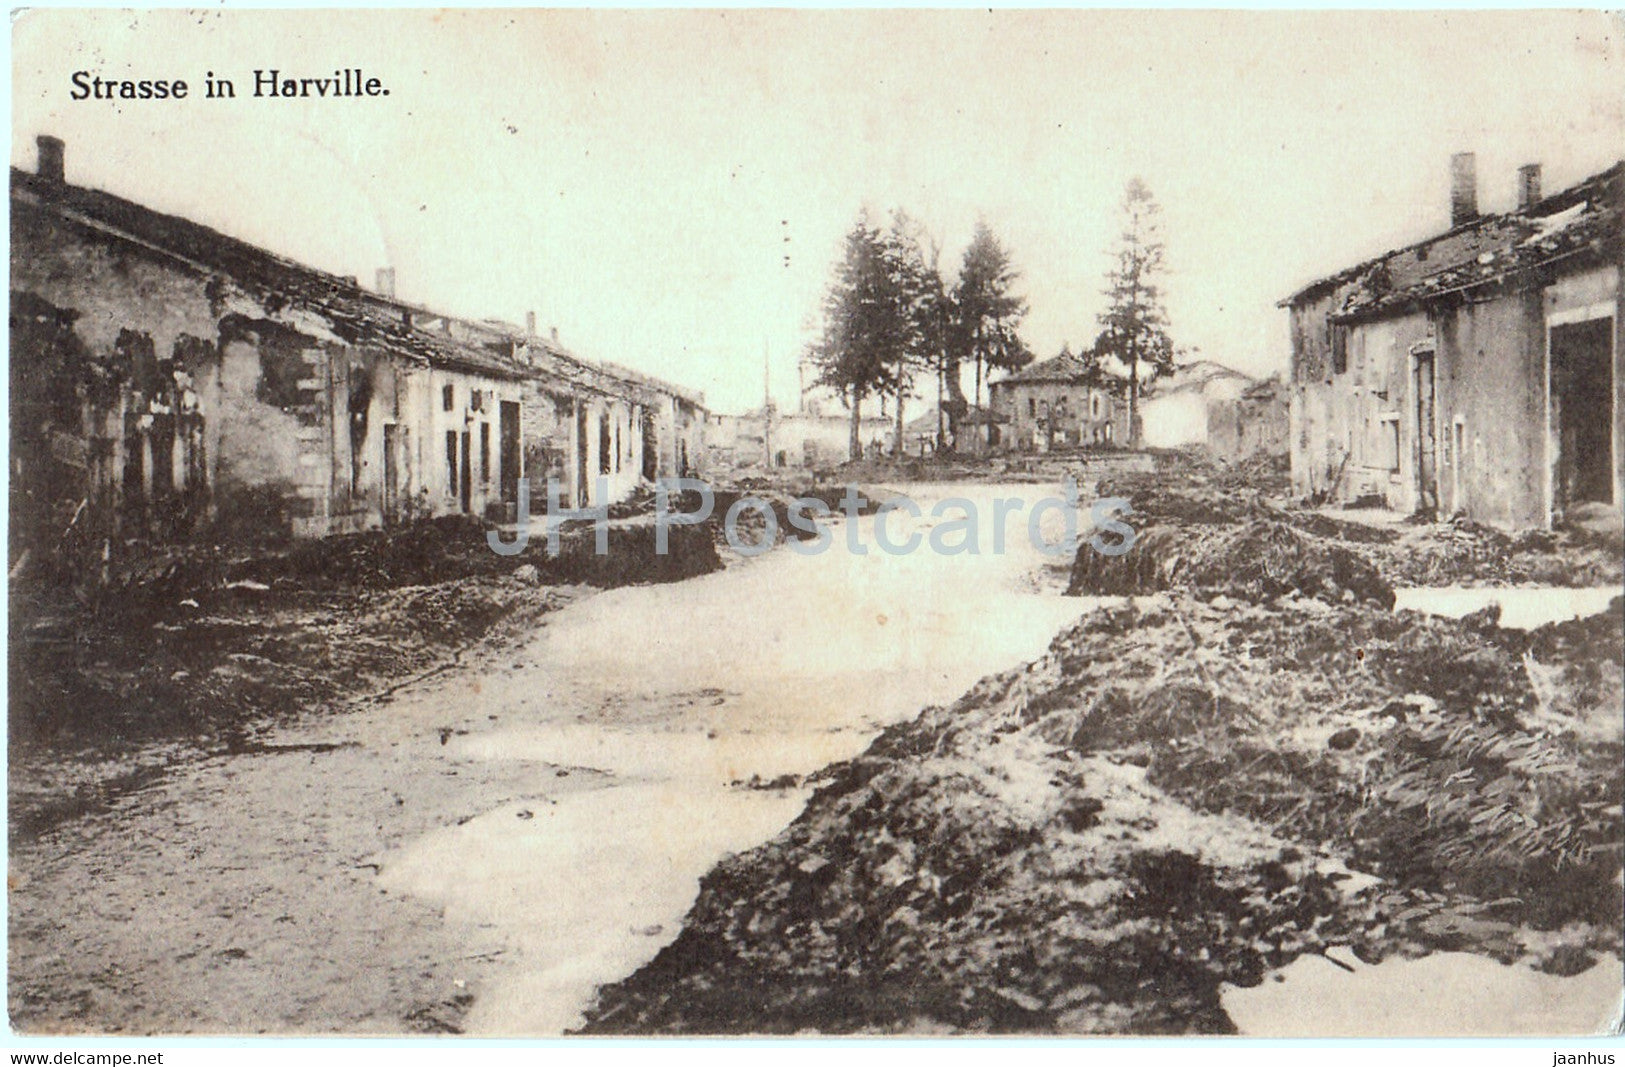 Strasse in Harville - 89 - Feldpost - Military - old postcard - 1915 - France - used - JH Postcards